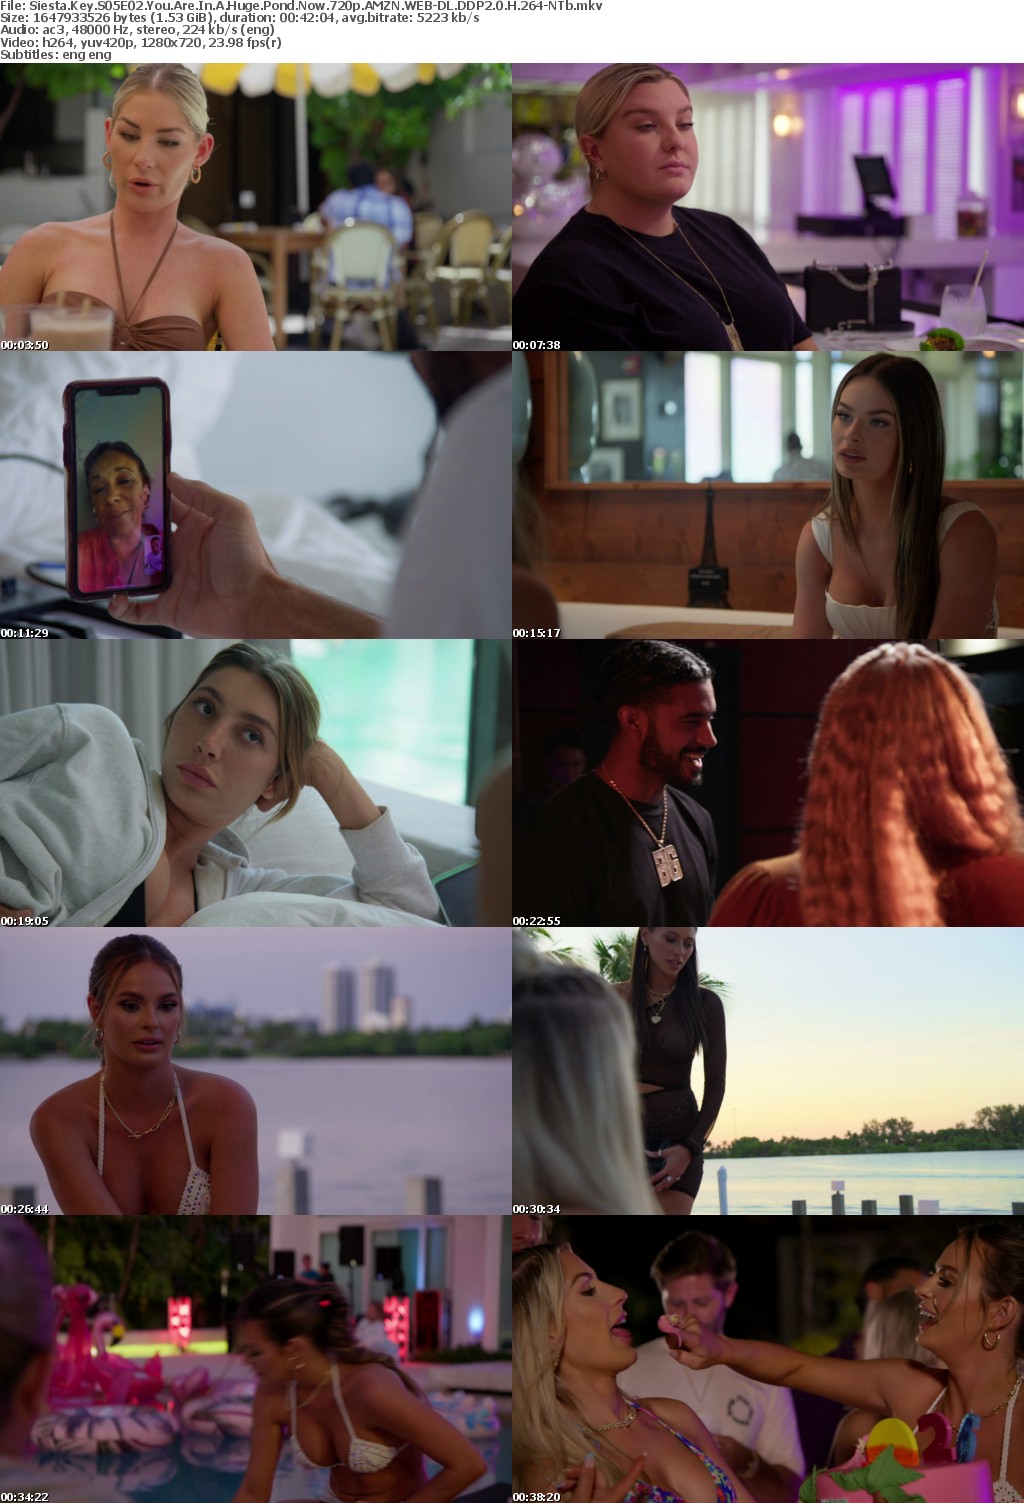 Siesta Key S05E02 You Are In A Huge Pond Now 720p AMZN WEBRip DDP2 0 x264-NTb